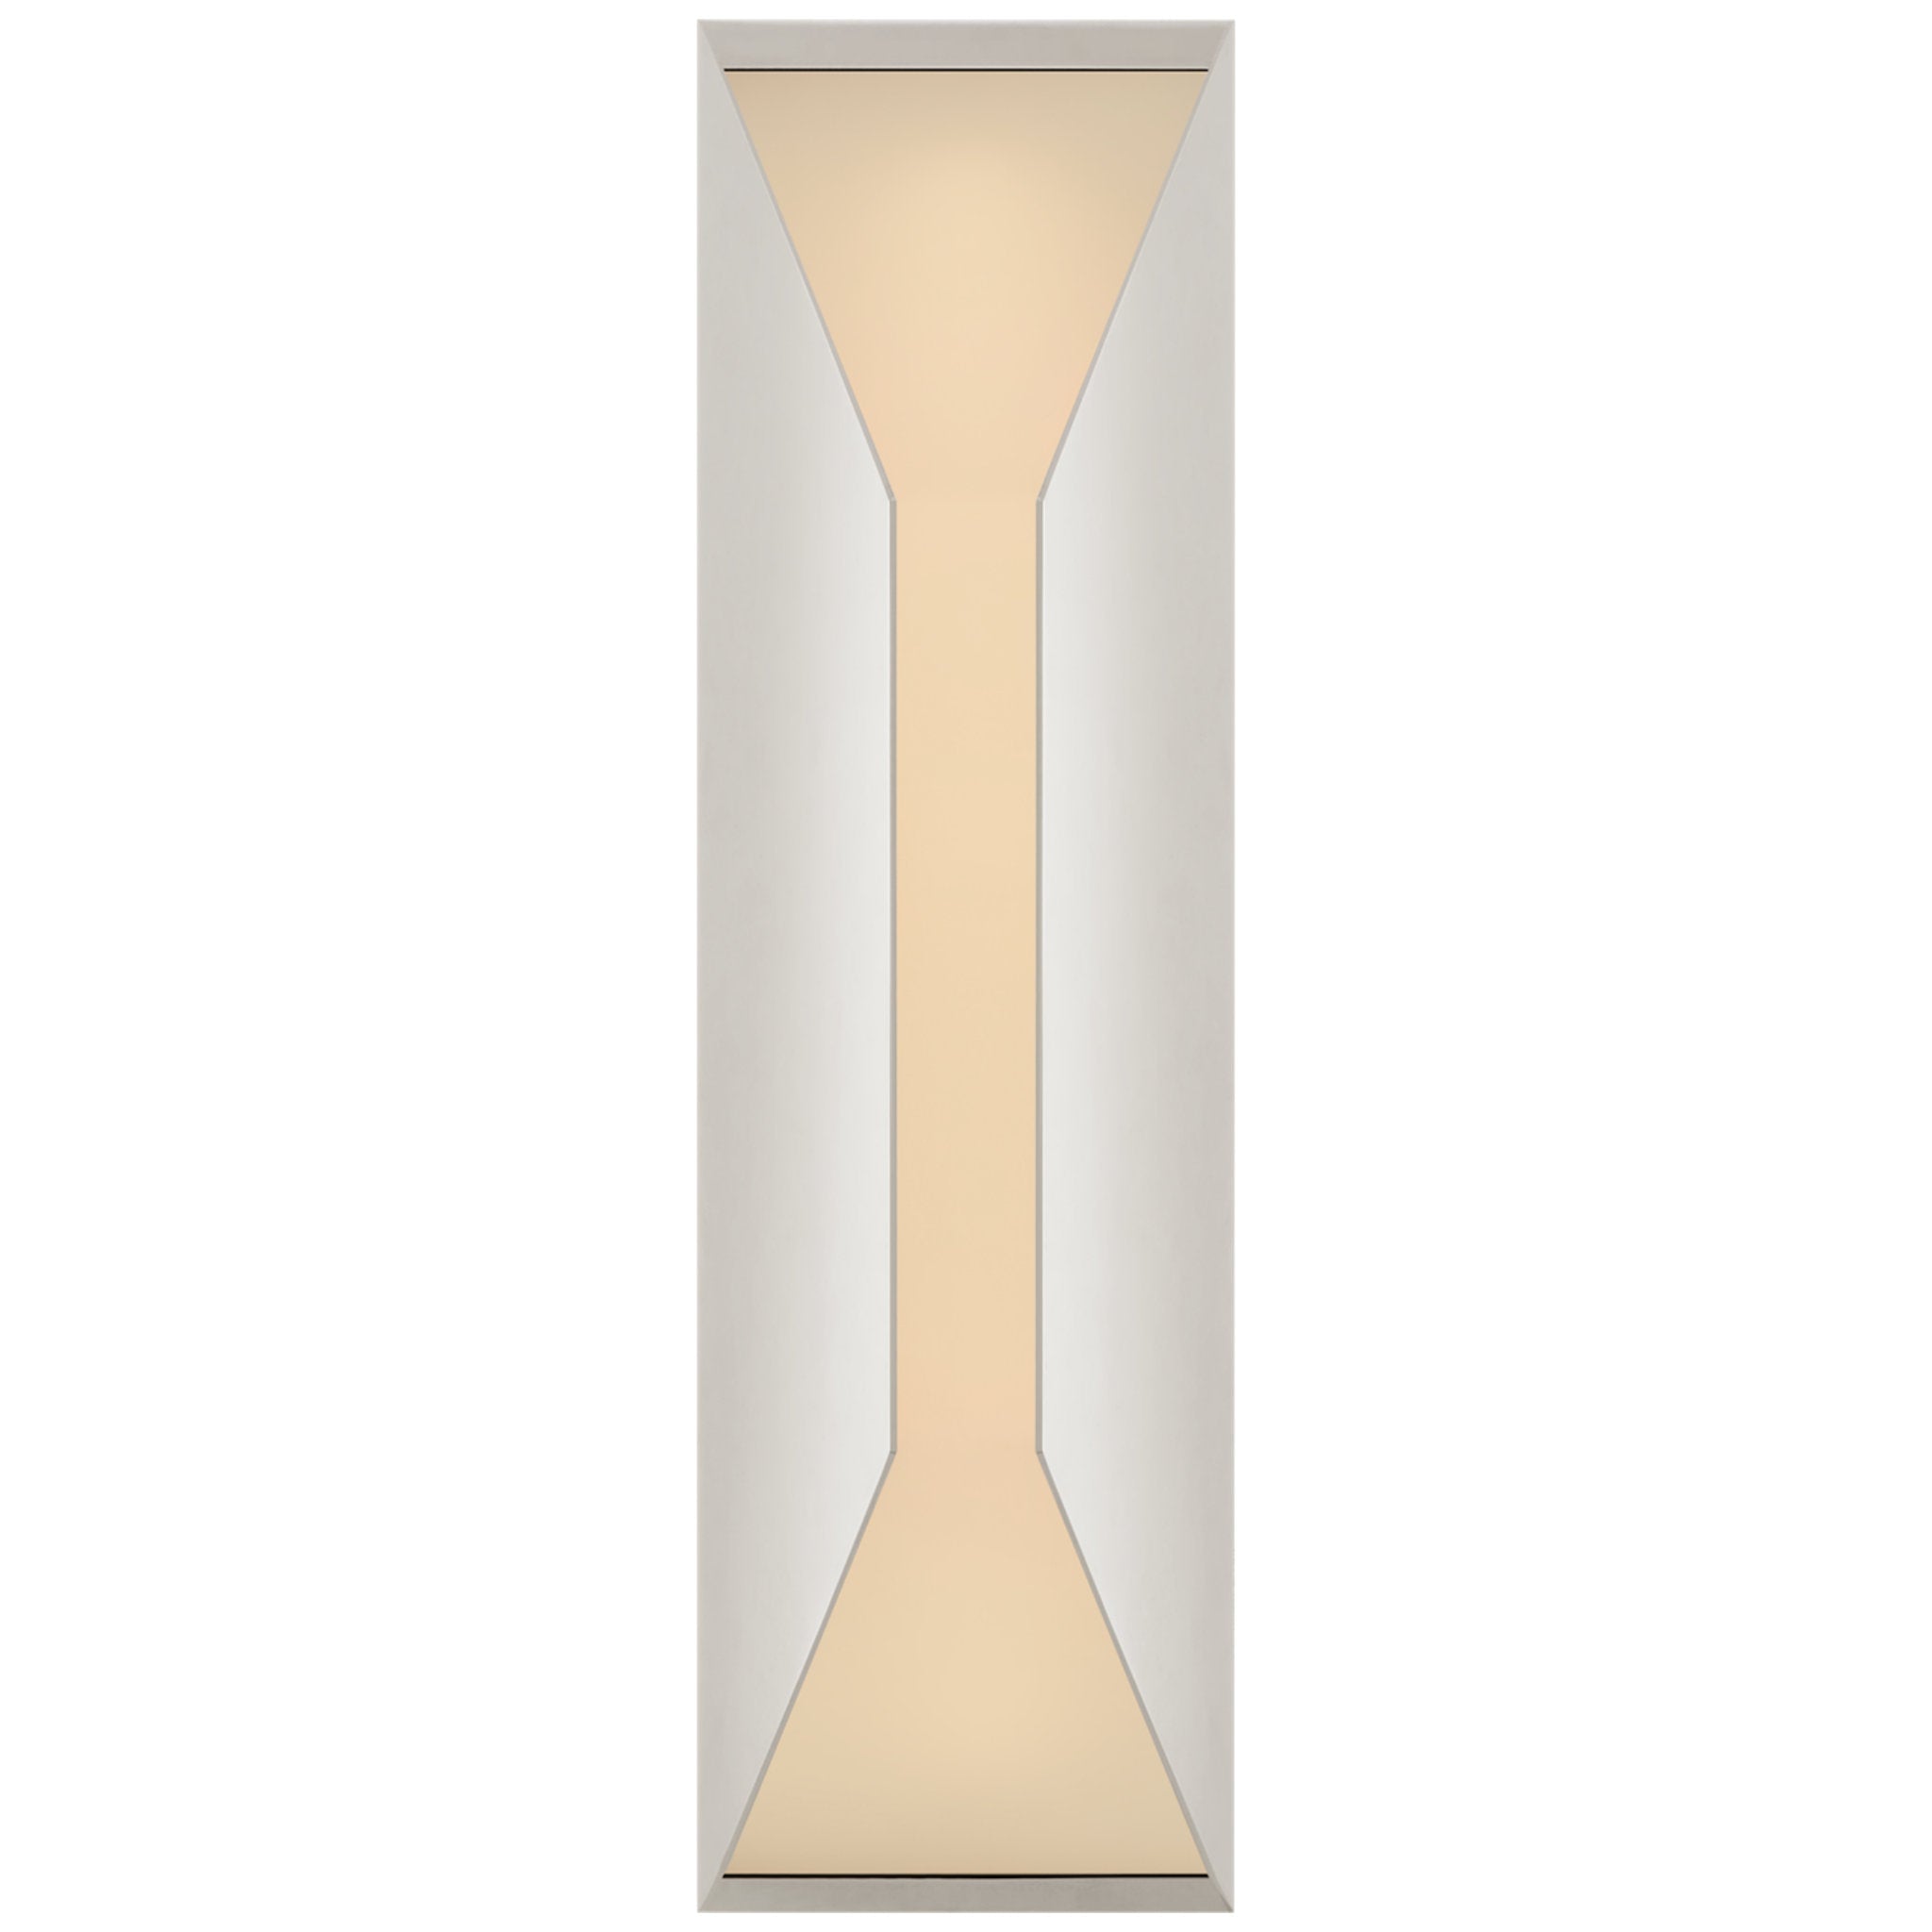 Kelly Wearstler Stretto 16" Sconce in Polished Nickel with Frosted Glass